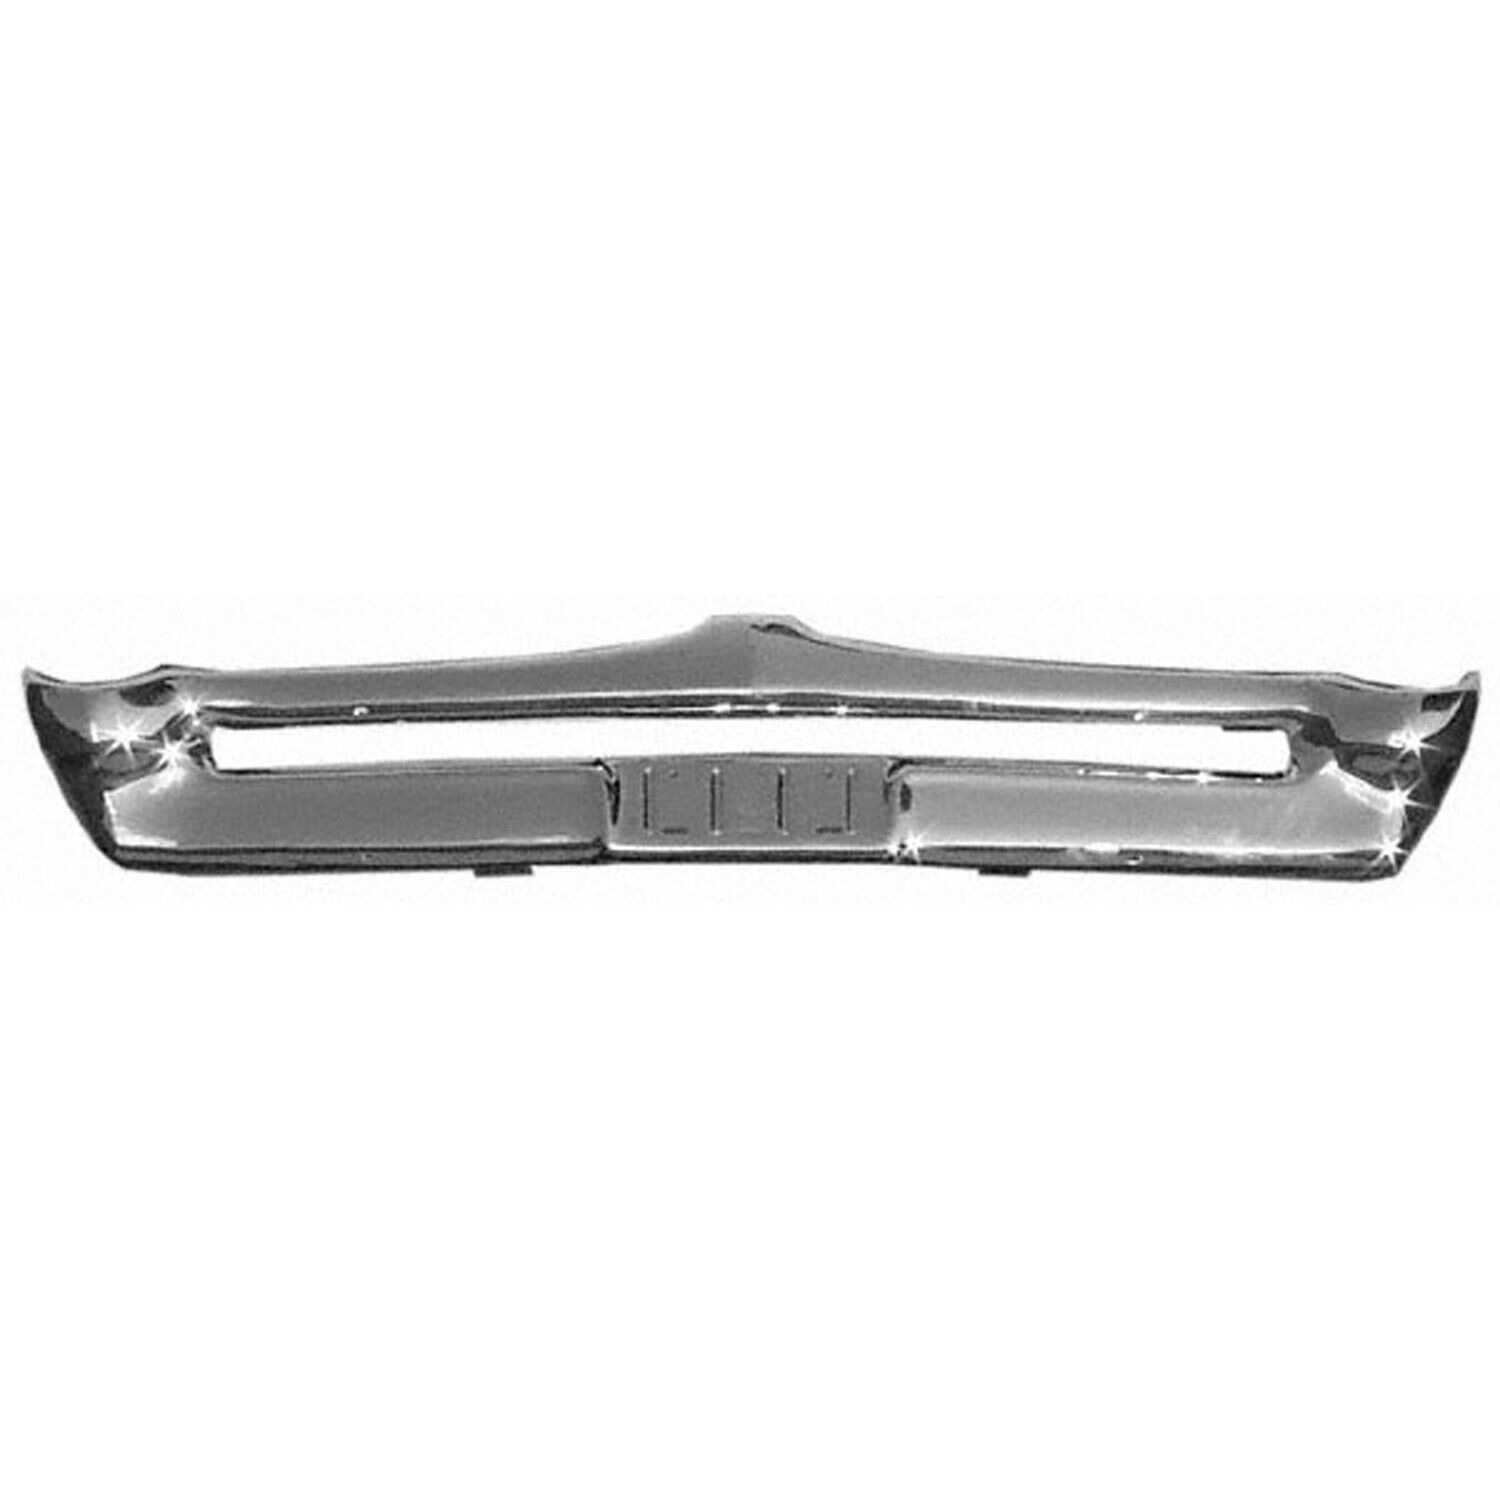 Front Bumper Assembly Chrome fits 66-67 Tempest / GTO 4331-000-66